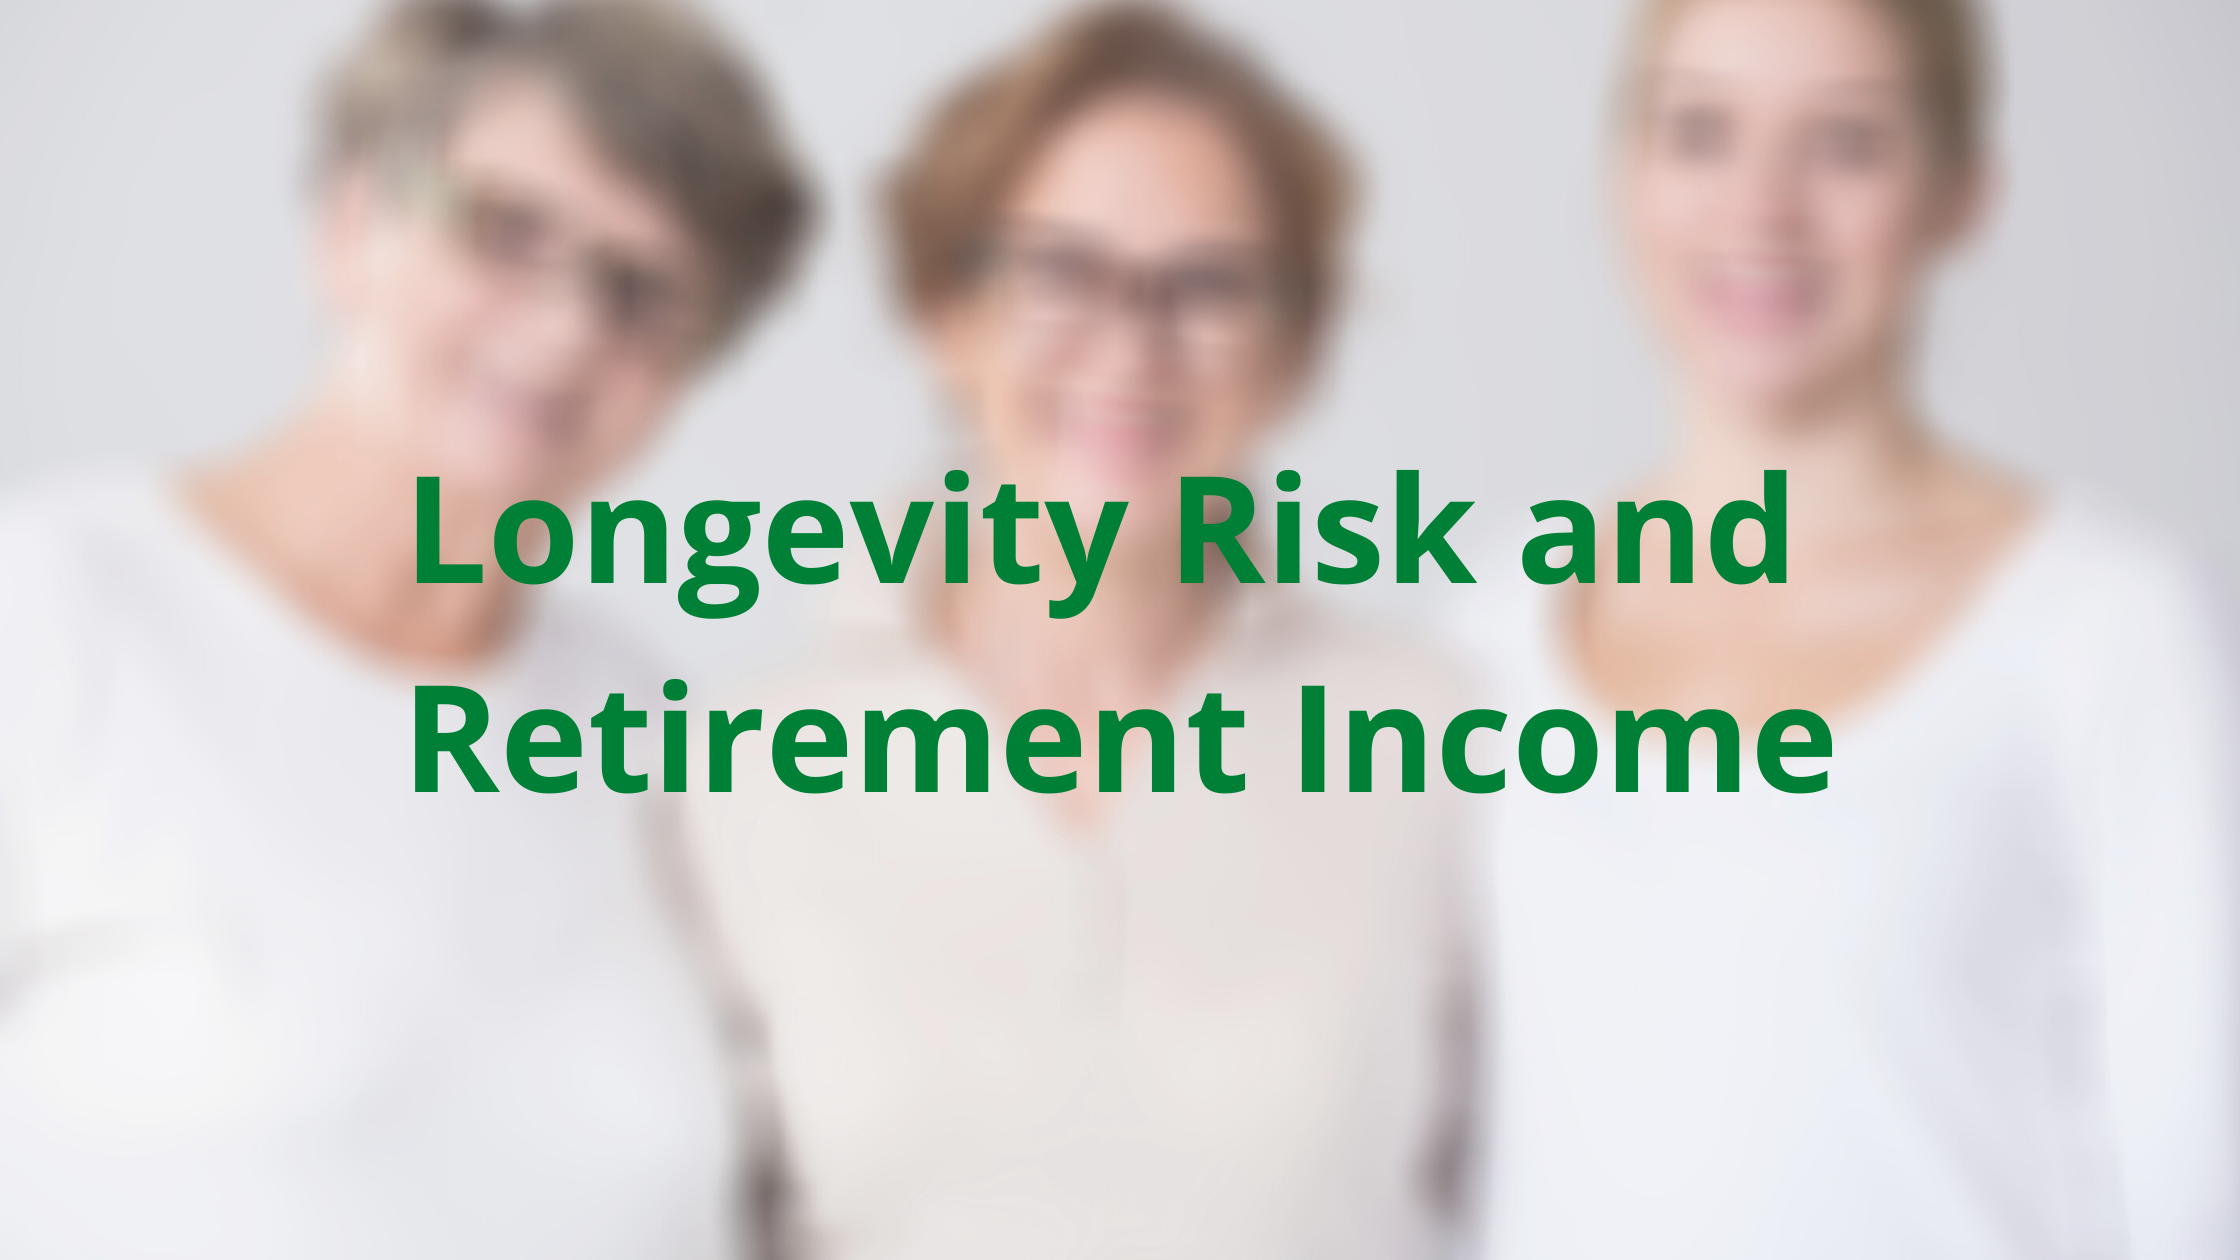 Longevity Risk and Retirement Income